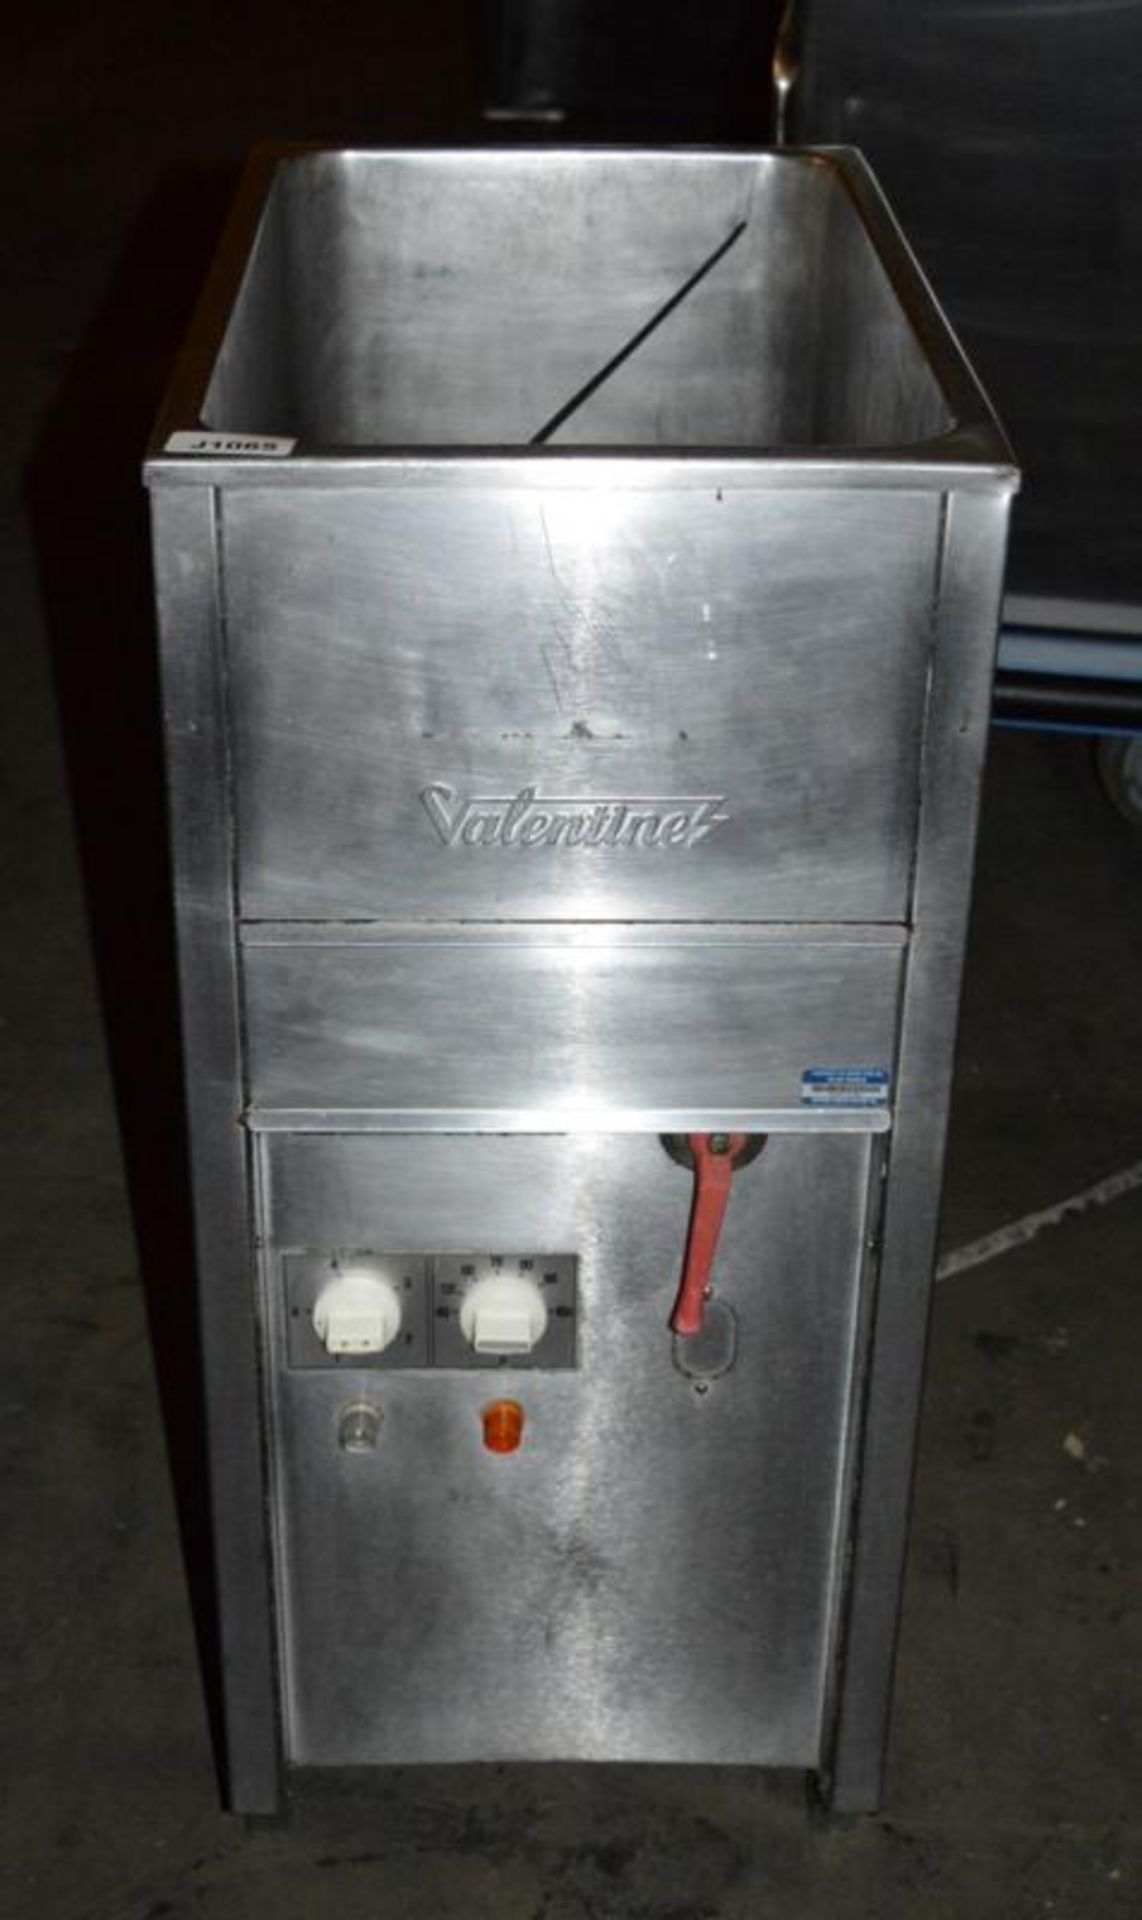 1 x Valentine Stainless Steel 3 Phase Pasta Boiler - CL232 - Ref J1065 - Location: Bolton BL1